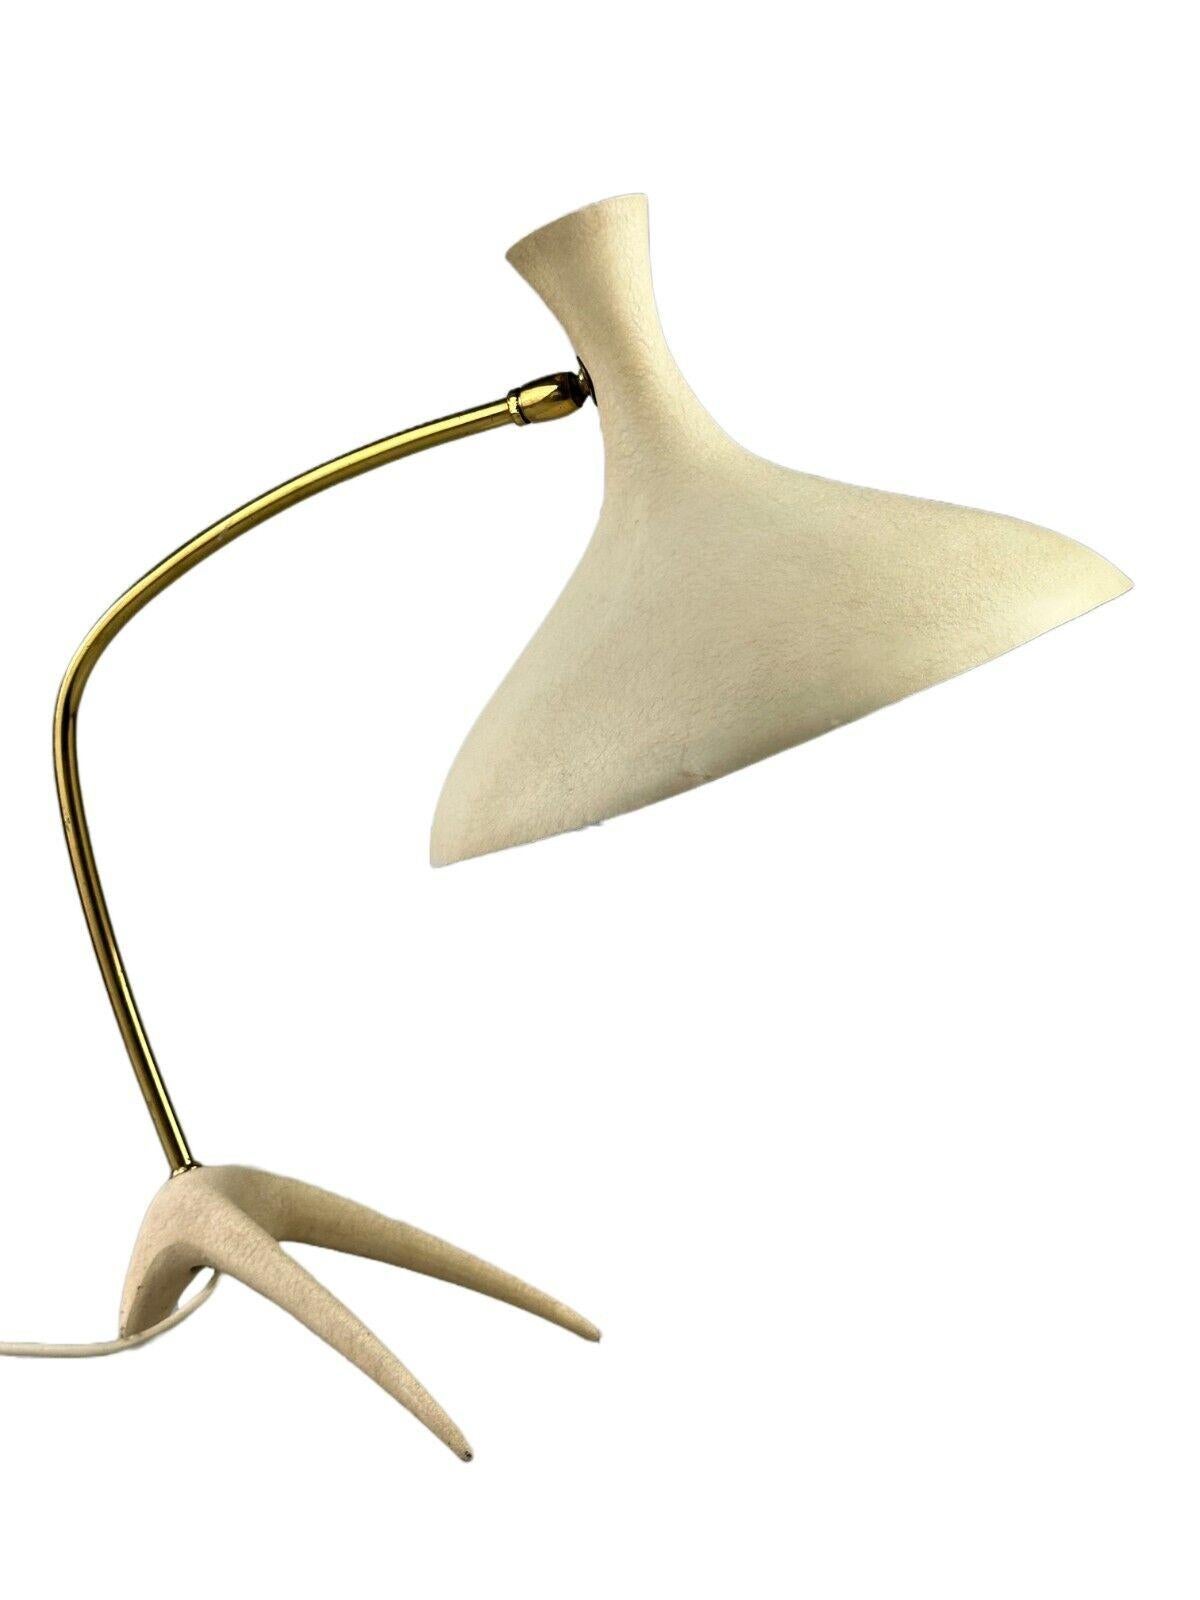 60s 70s table lamp desk lamp Cosack Leuchten Germany metal

Object: desk lamp

Manufacturer: Cosack

Condition: good - vintage

Age: around 1960-1970

Dimensions:

Width = 44cm
Depth = 26.5cm
Height = 45cm

Material: metal

Other notes:

E27